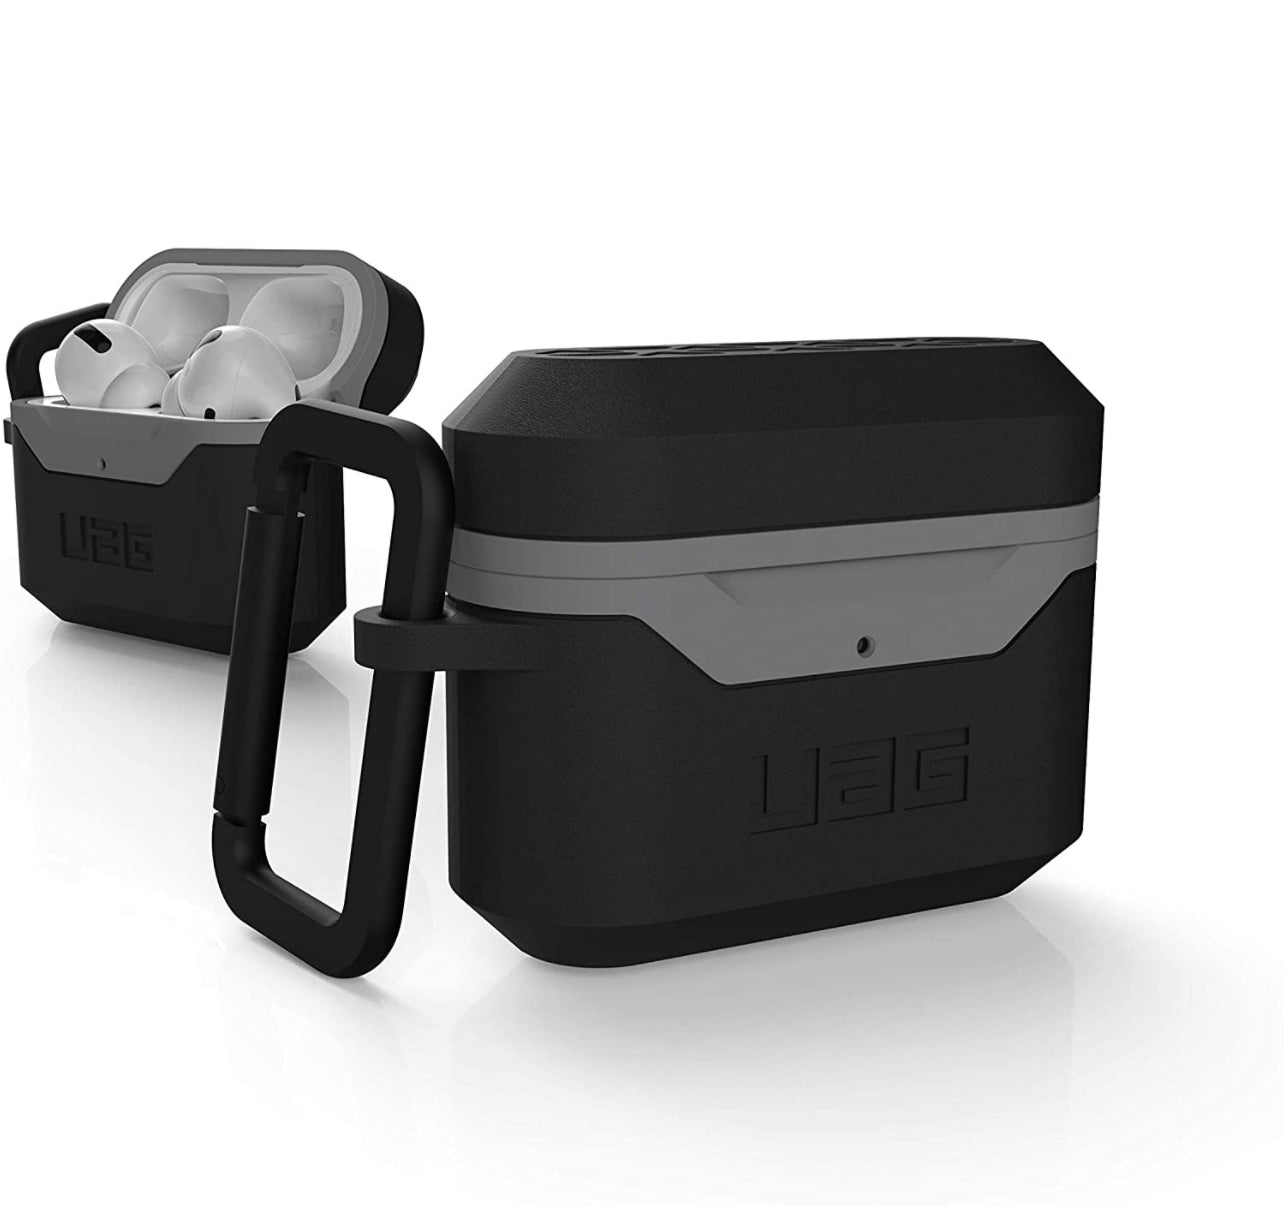 UAG- Hard Case For AirPods Pro- Black/Gray